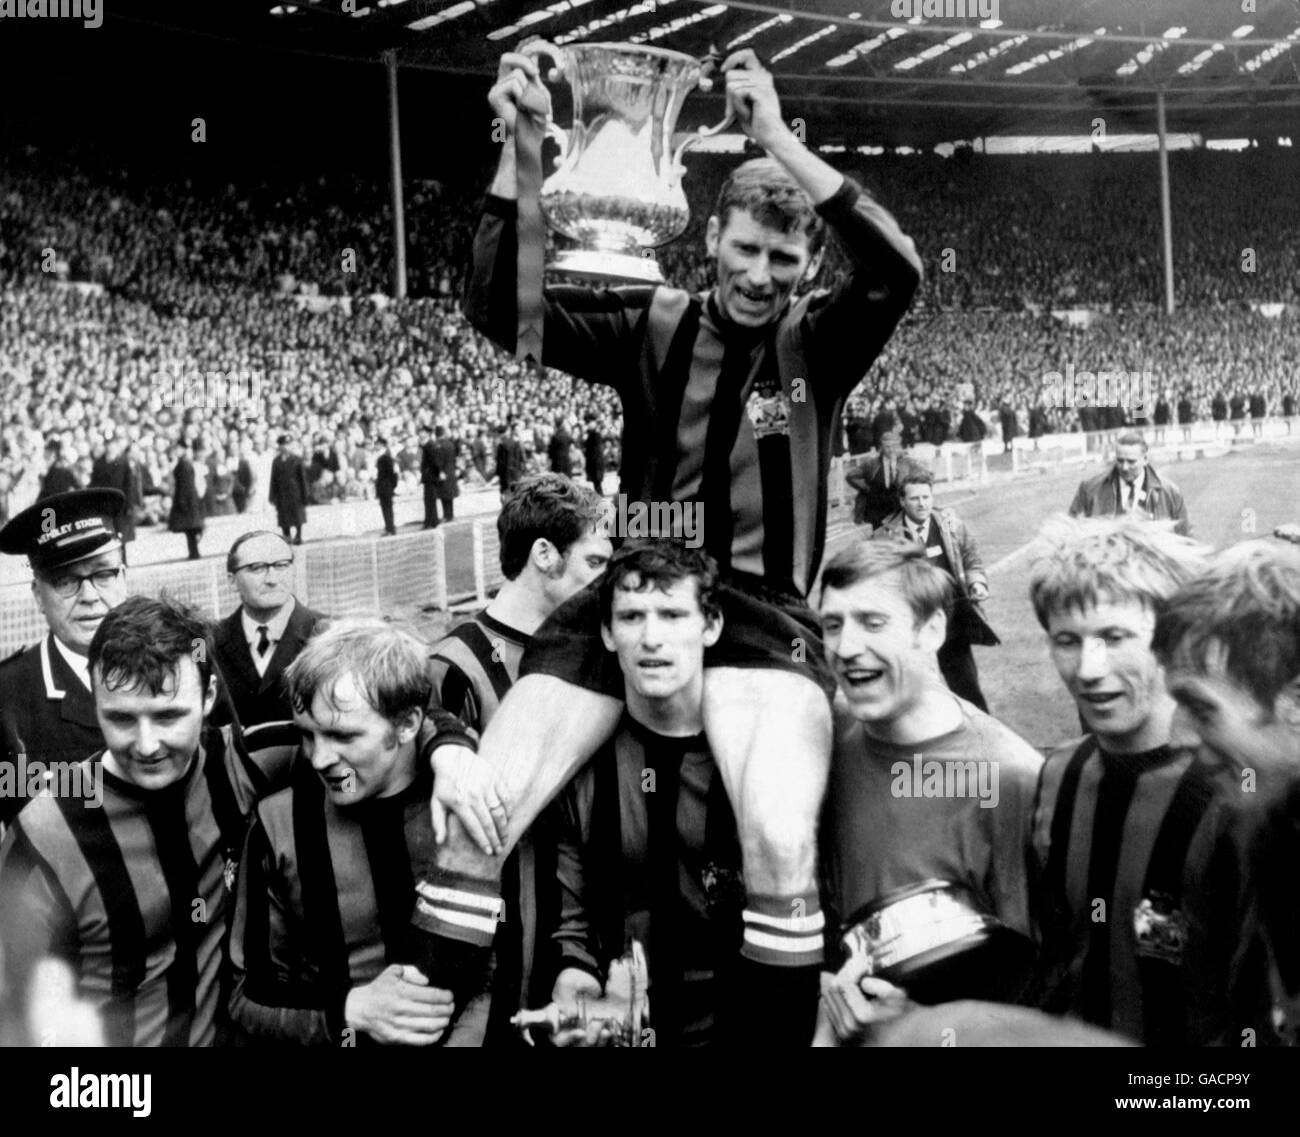 Manchester City captain Tony Book holds the FA Cup aloft as his teammates celebrate around him: (l-r) Glyn Pardoe, Francis Lee, Neil Young (half hidden), Mike Doyle, goalkeeper Harry Dowd, Colin Bell, Alan Oakes Stock Photo